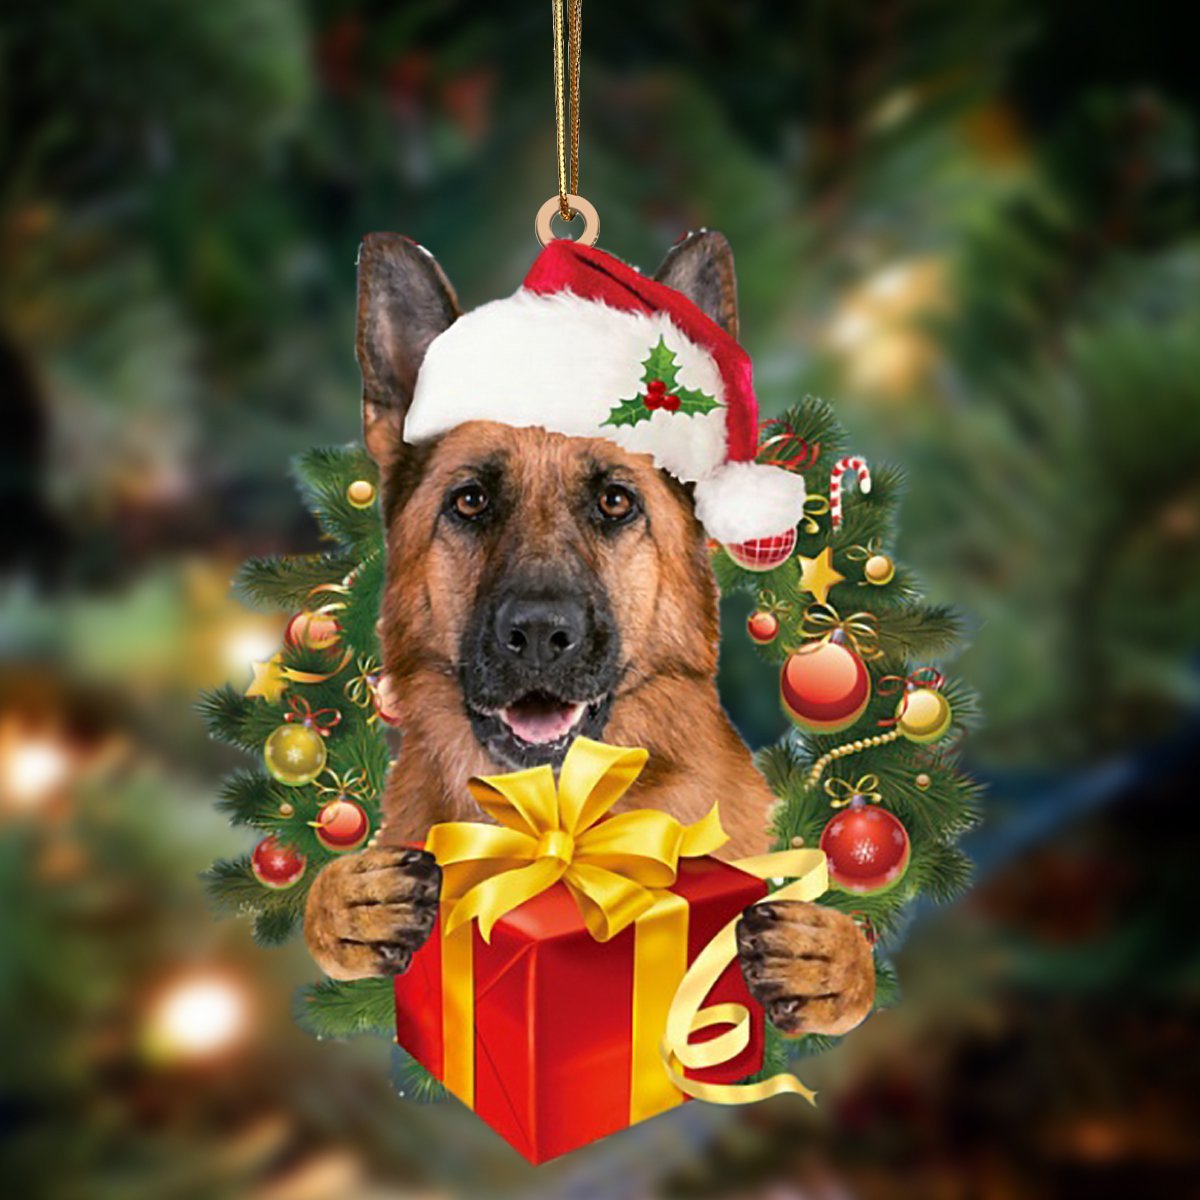 German Shepherd Give Gifts Hanging Ornament - Flat Acrylic Dog Ornament – Dog Lovers Gifts For Him Or Her